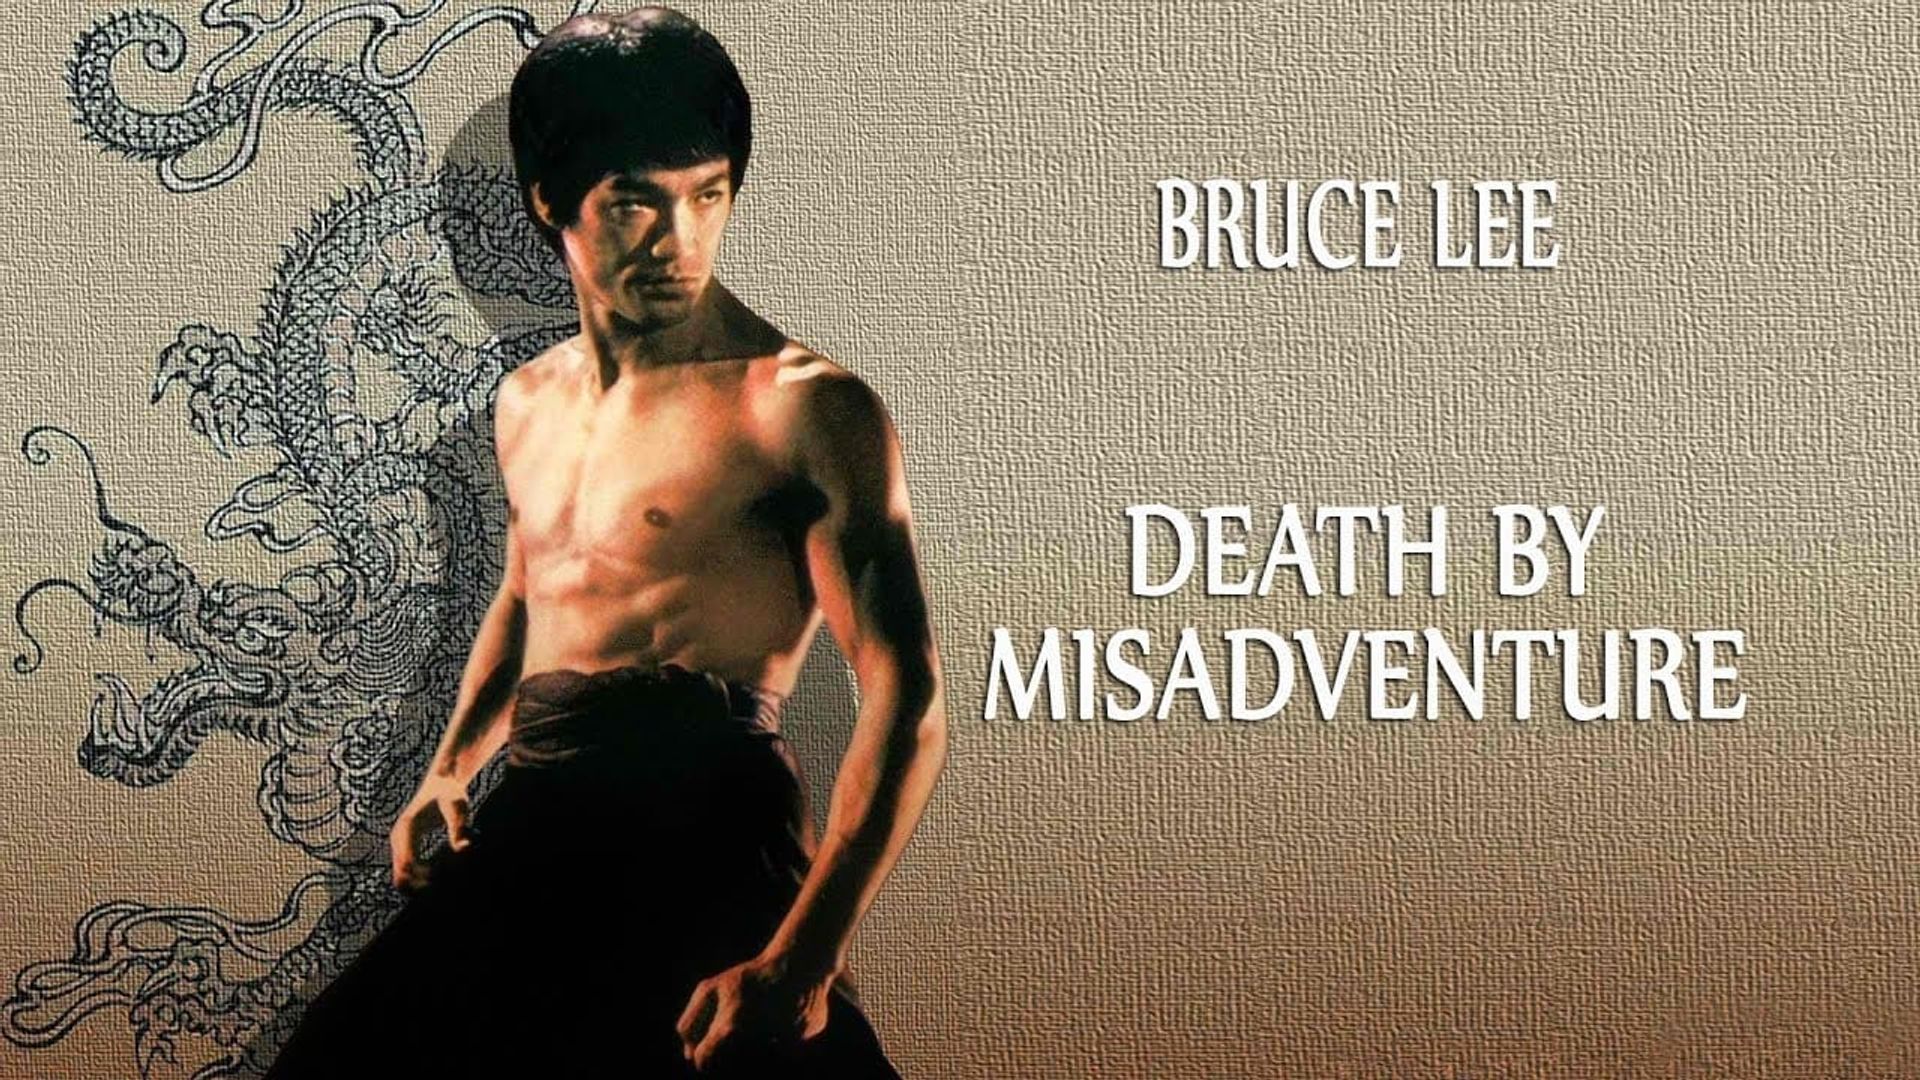 Death by Misadventure: The Mysterious Life of Bruce Lee background